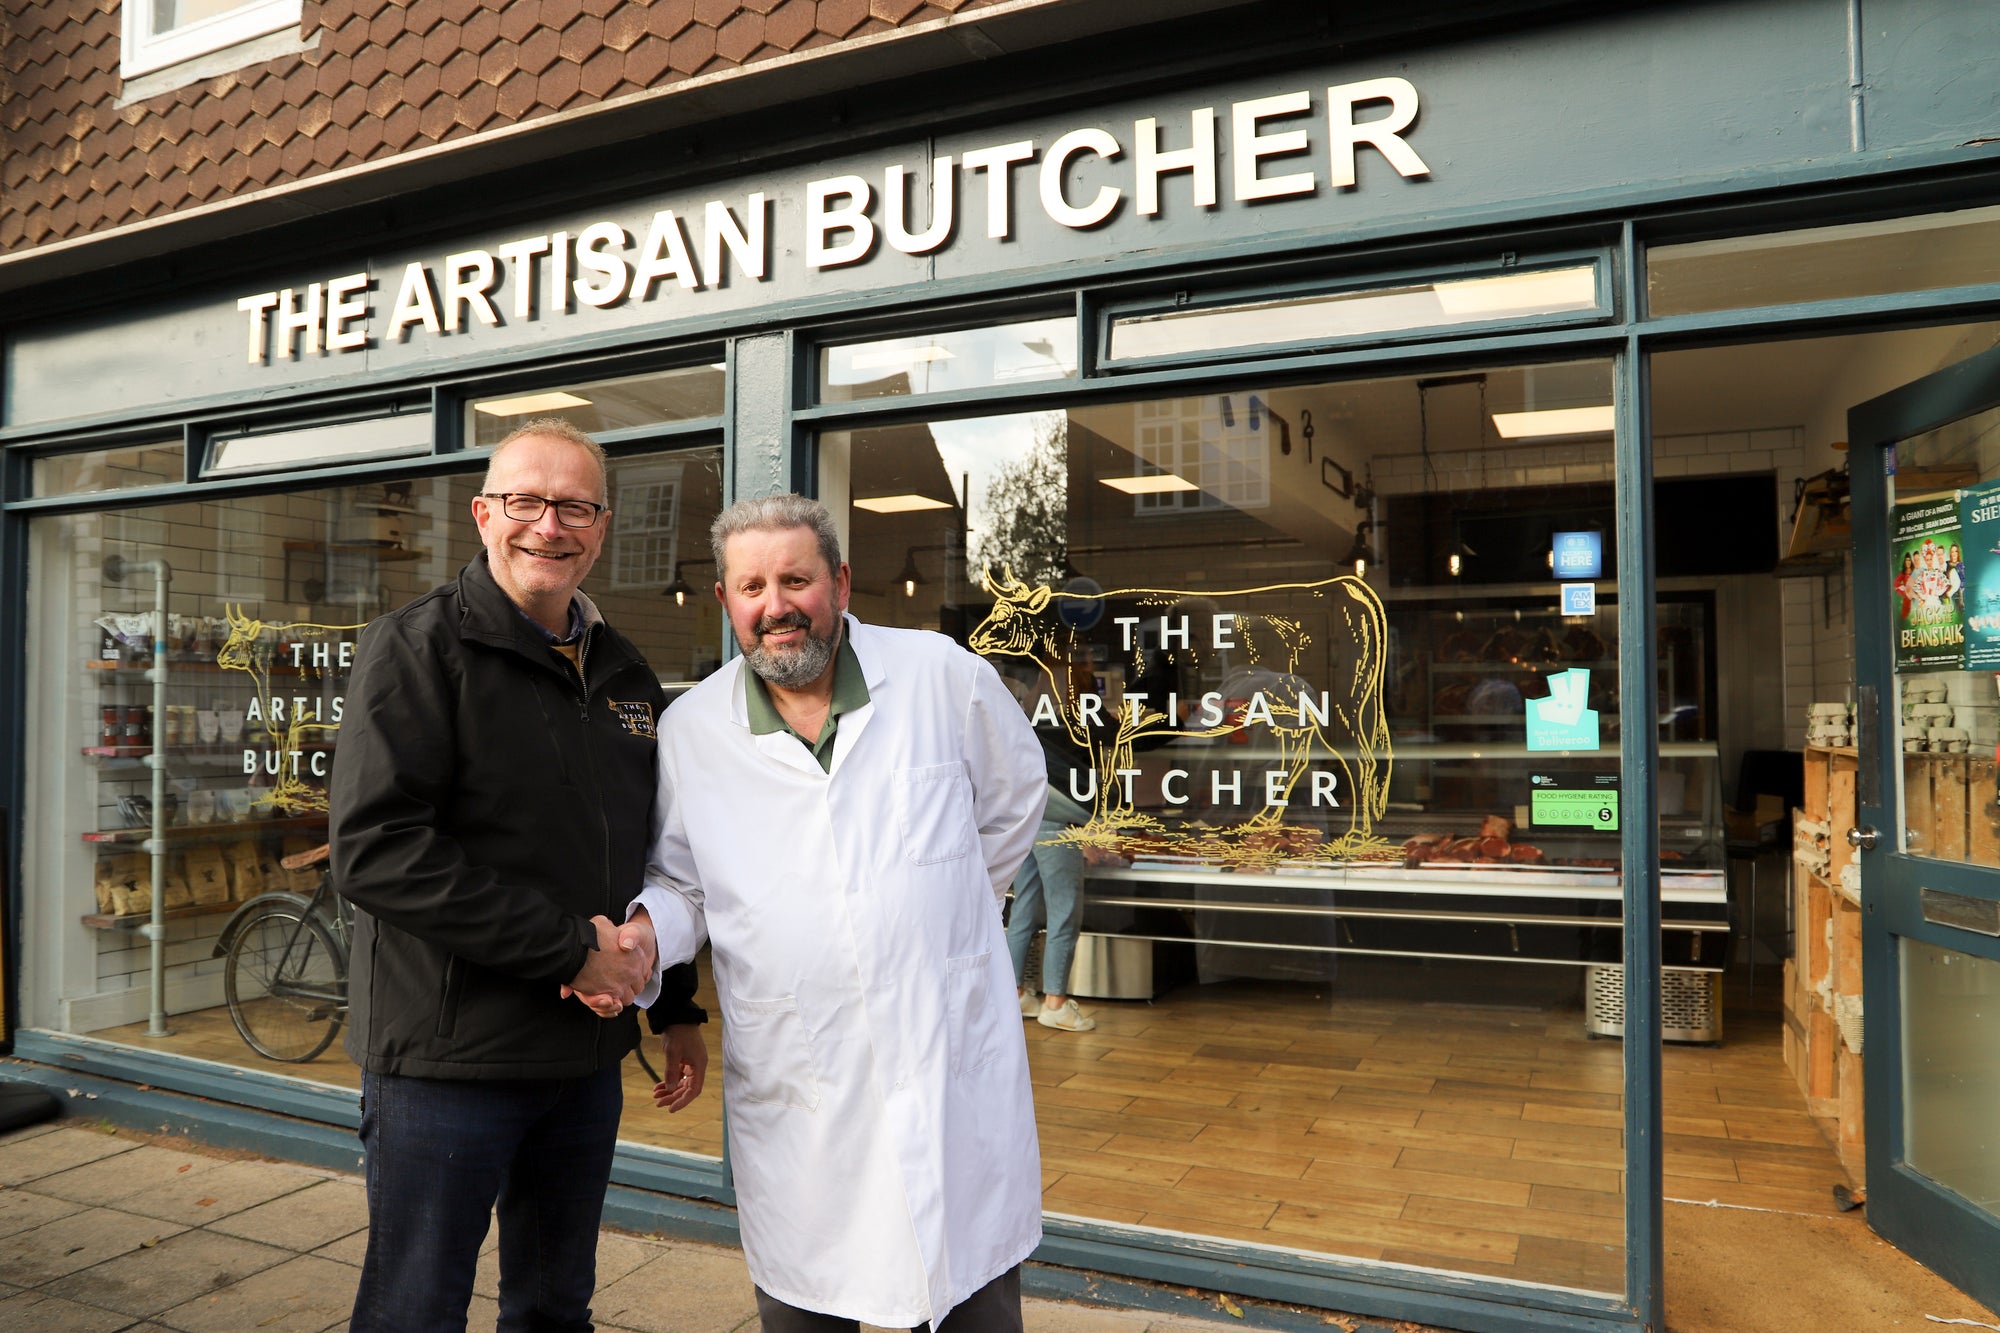 50 years of butchering in Warwick and Leamington, but good service still wins out.